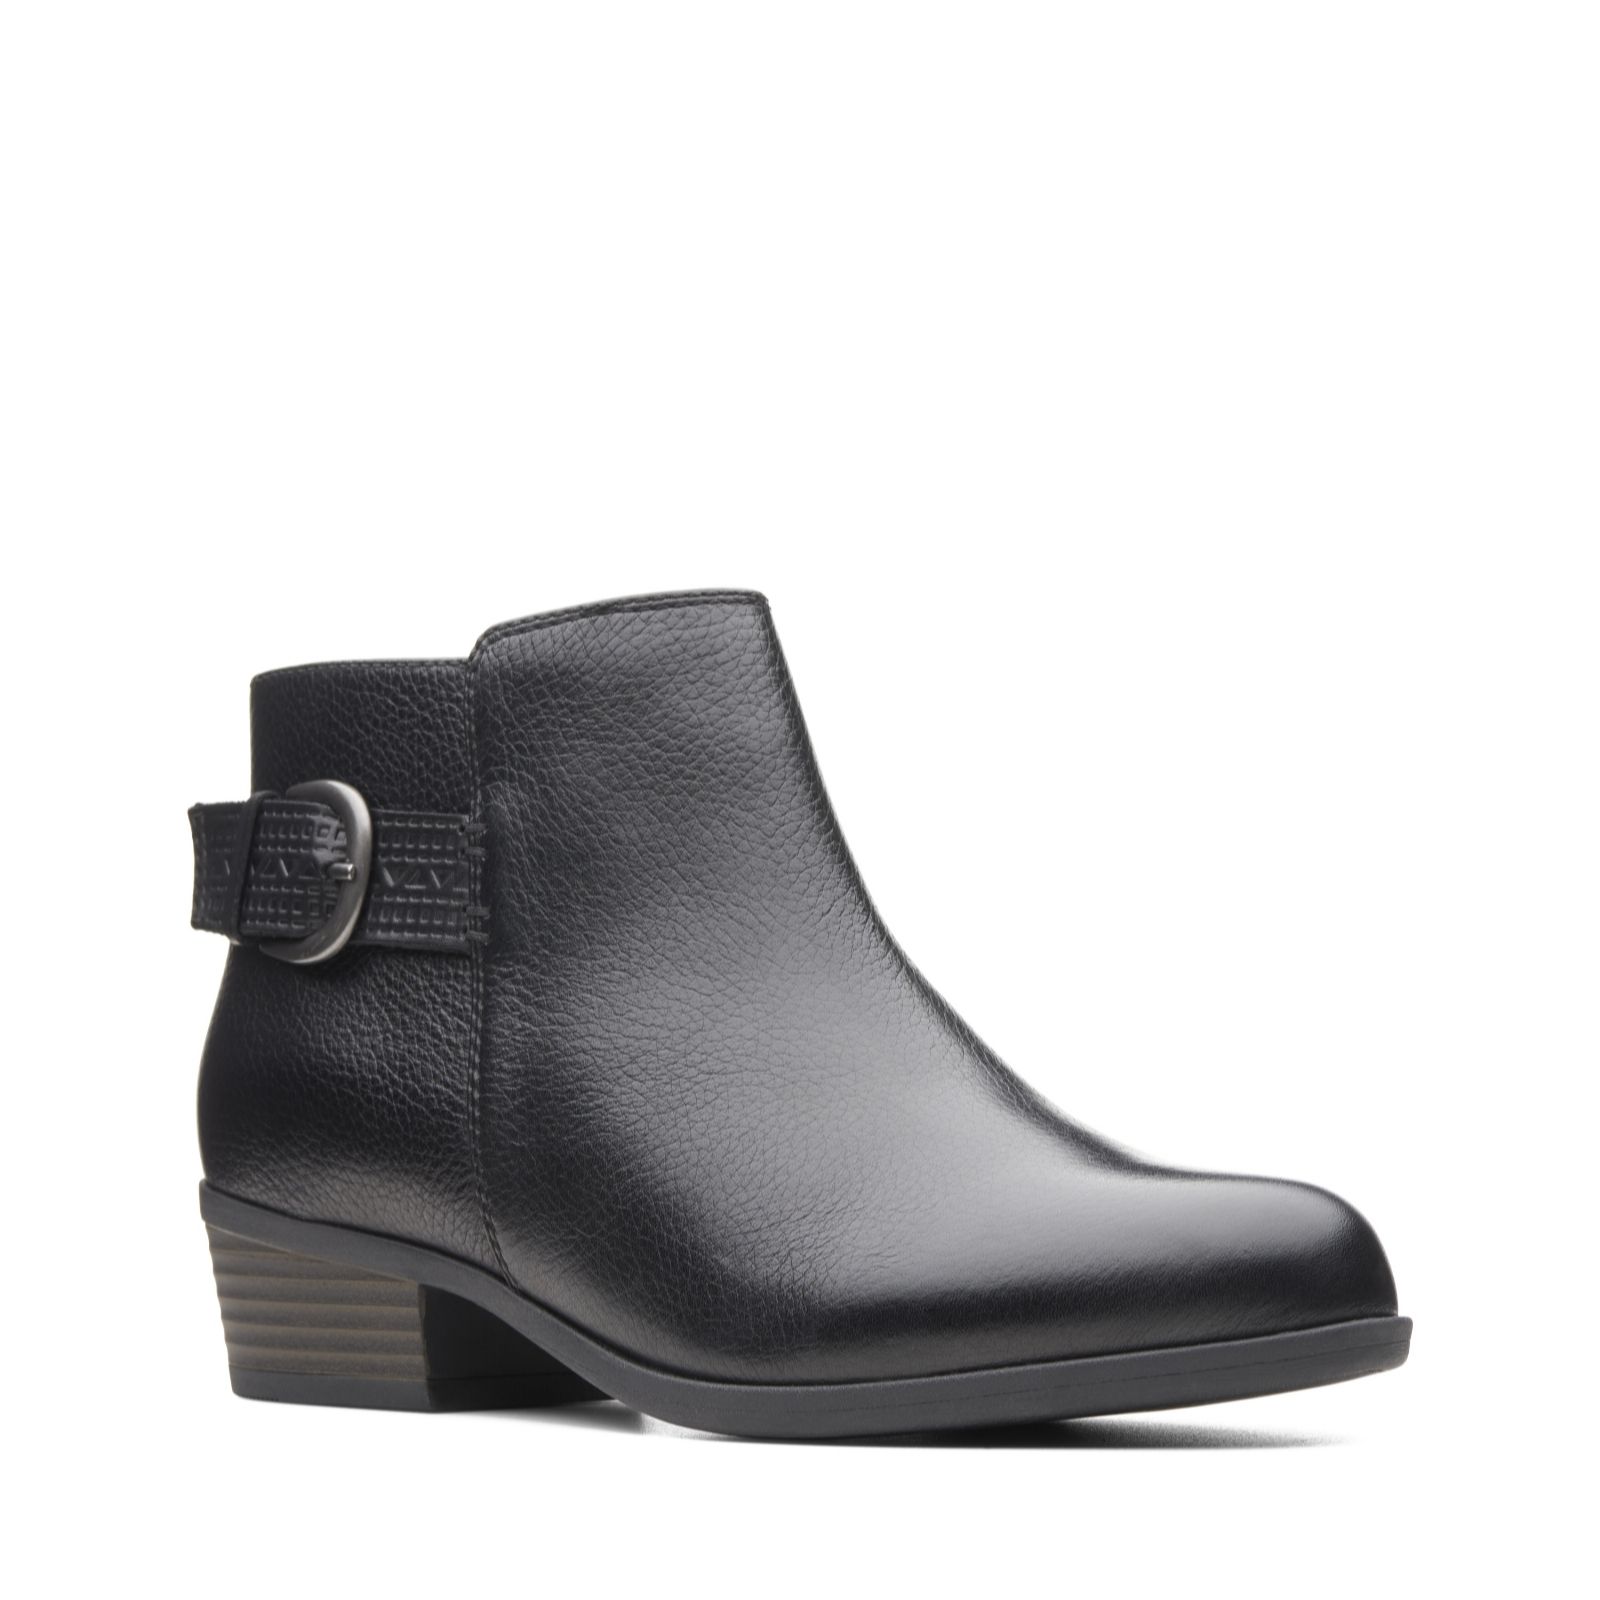 Clarks Addiy Kara Leather Ankle Boot with Buckle Detail - QVC UK